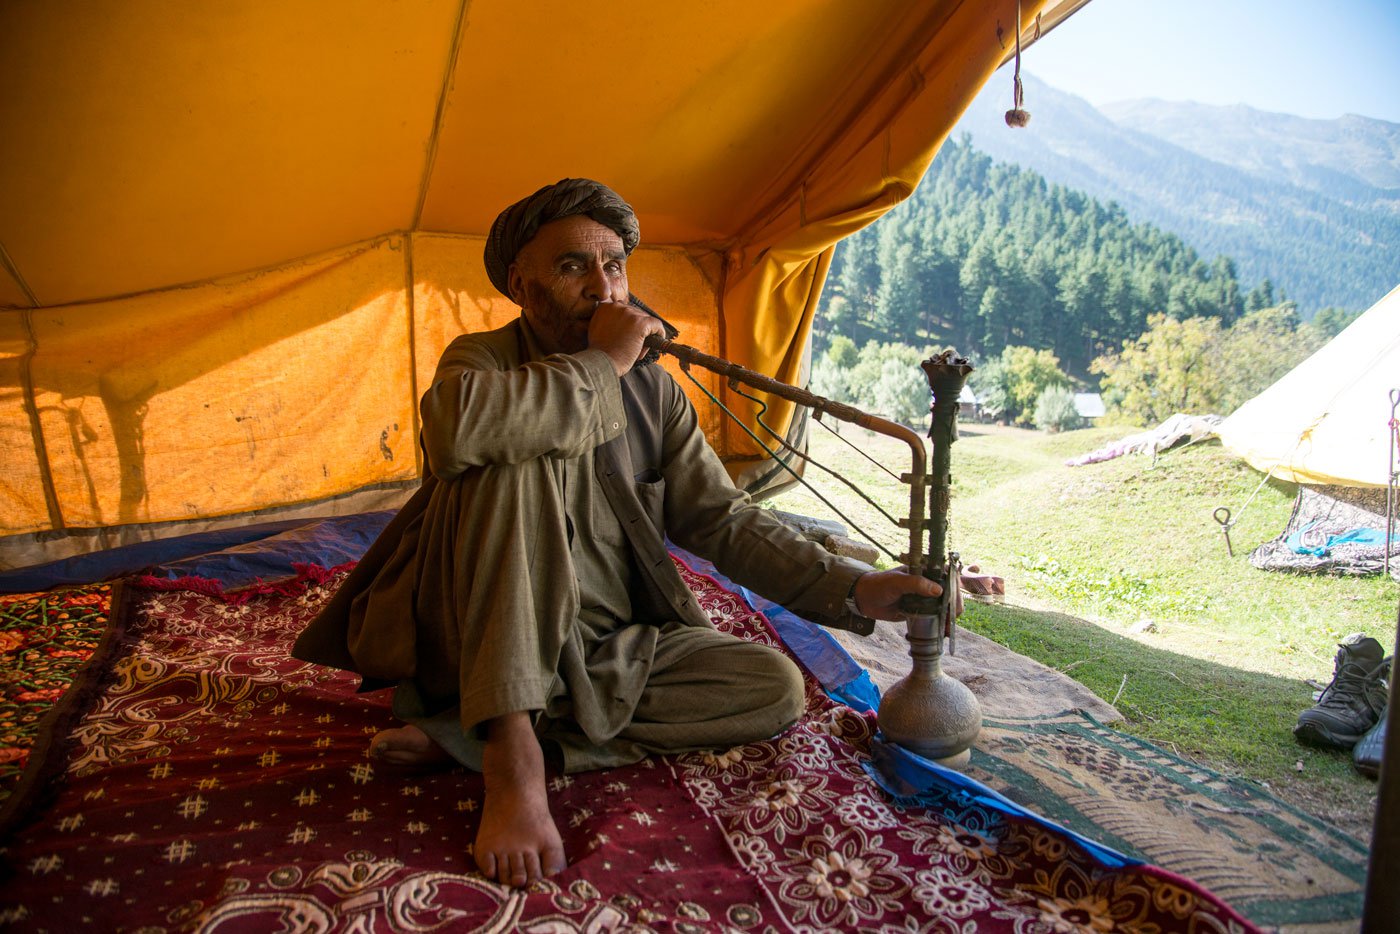 Mohammad Yunus relaxing in his tent with a hookah